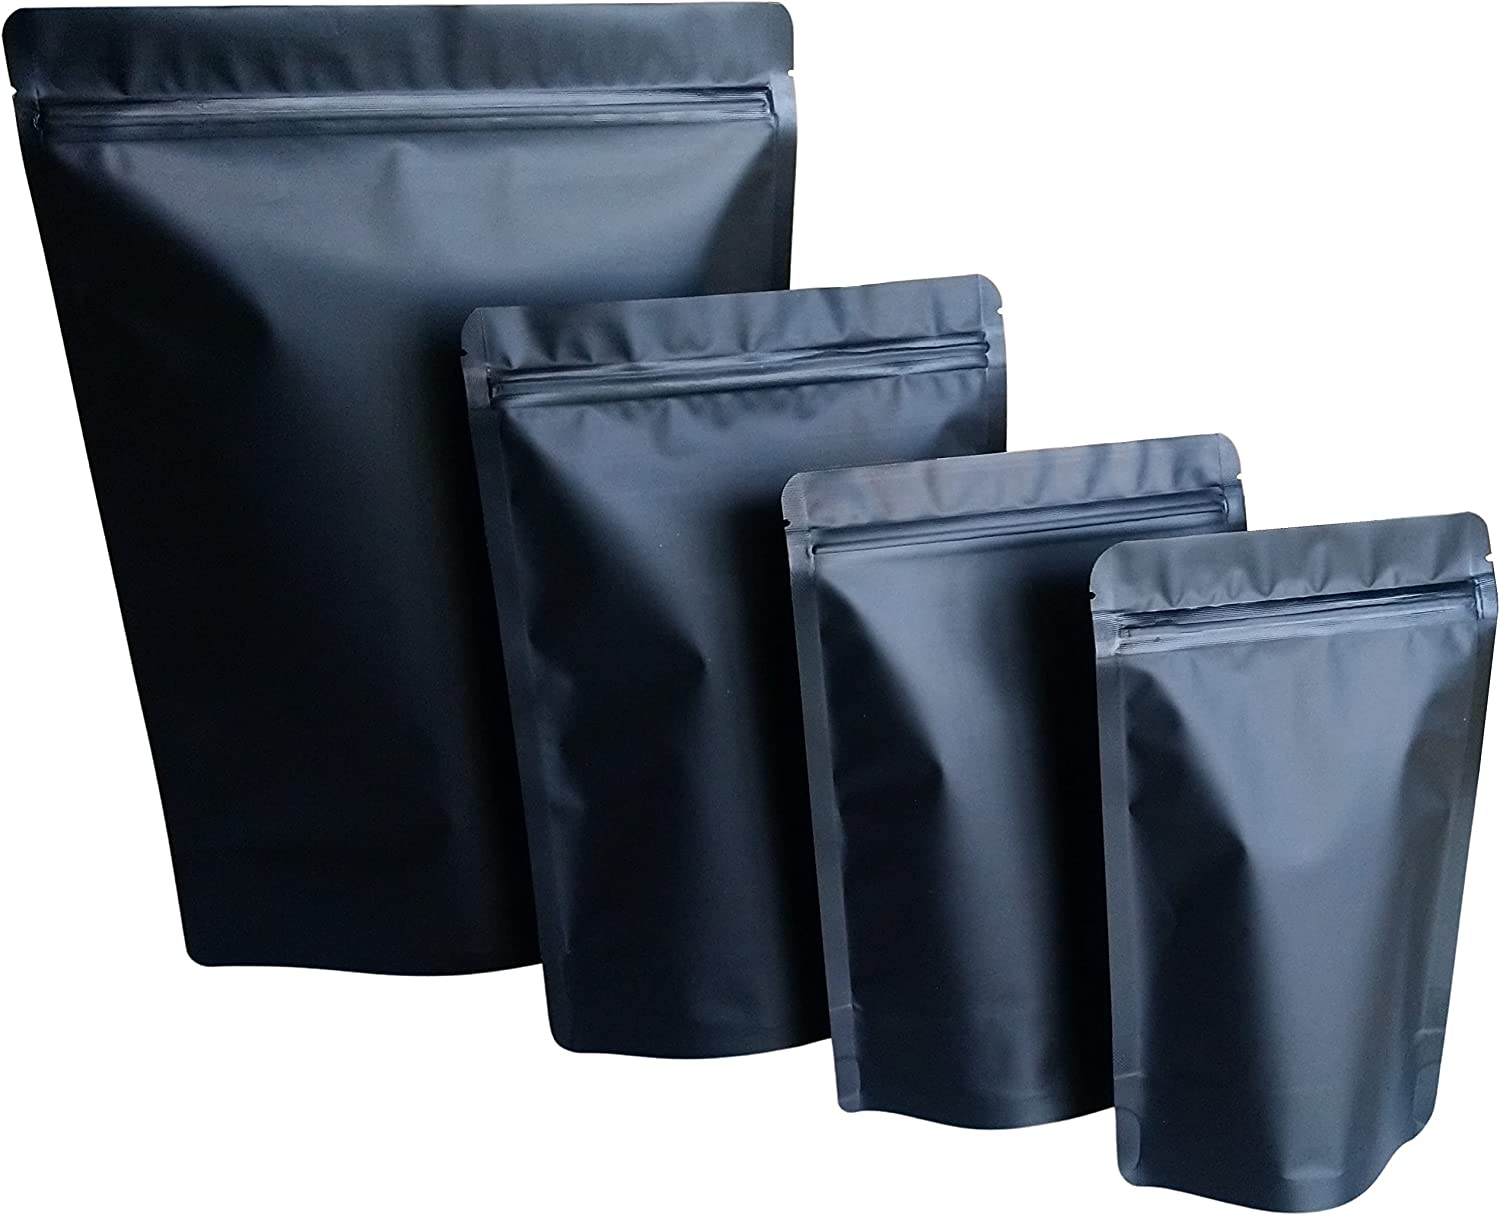 50 Pack Mylar Bags Food Storage Bags Extra Large (XL) 9.5x13.5 inch Matte Black Gallon Zipper Stand Up Resealable Airtight Pouches Smell Proof Bags